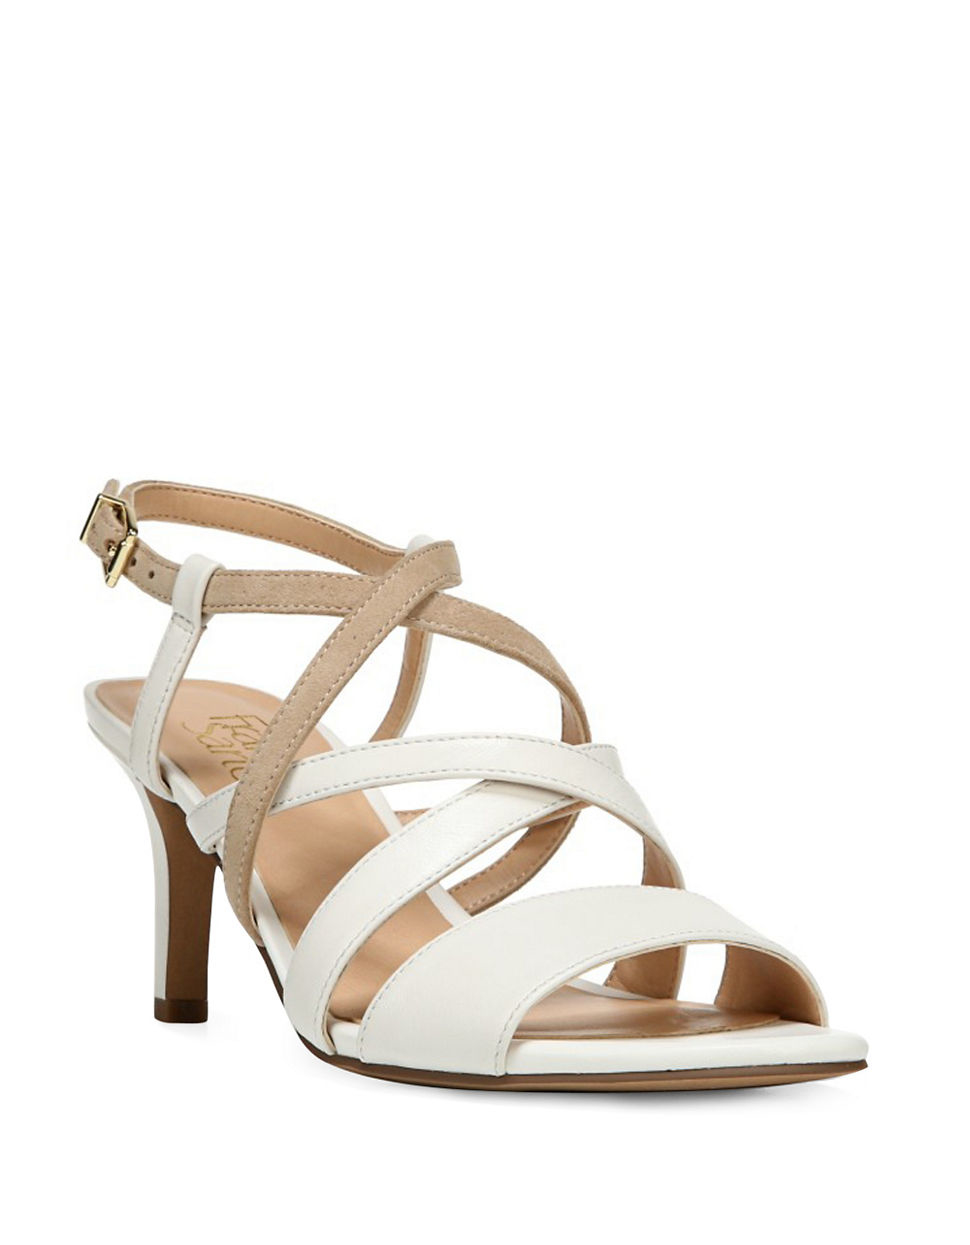 Franco sarto Olian Leather Slingback Sandals in White | Lyst